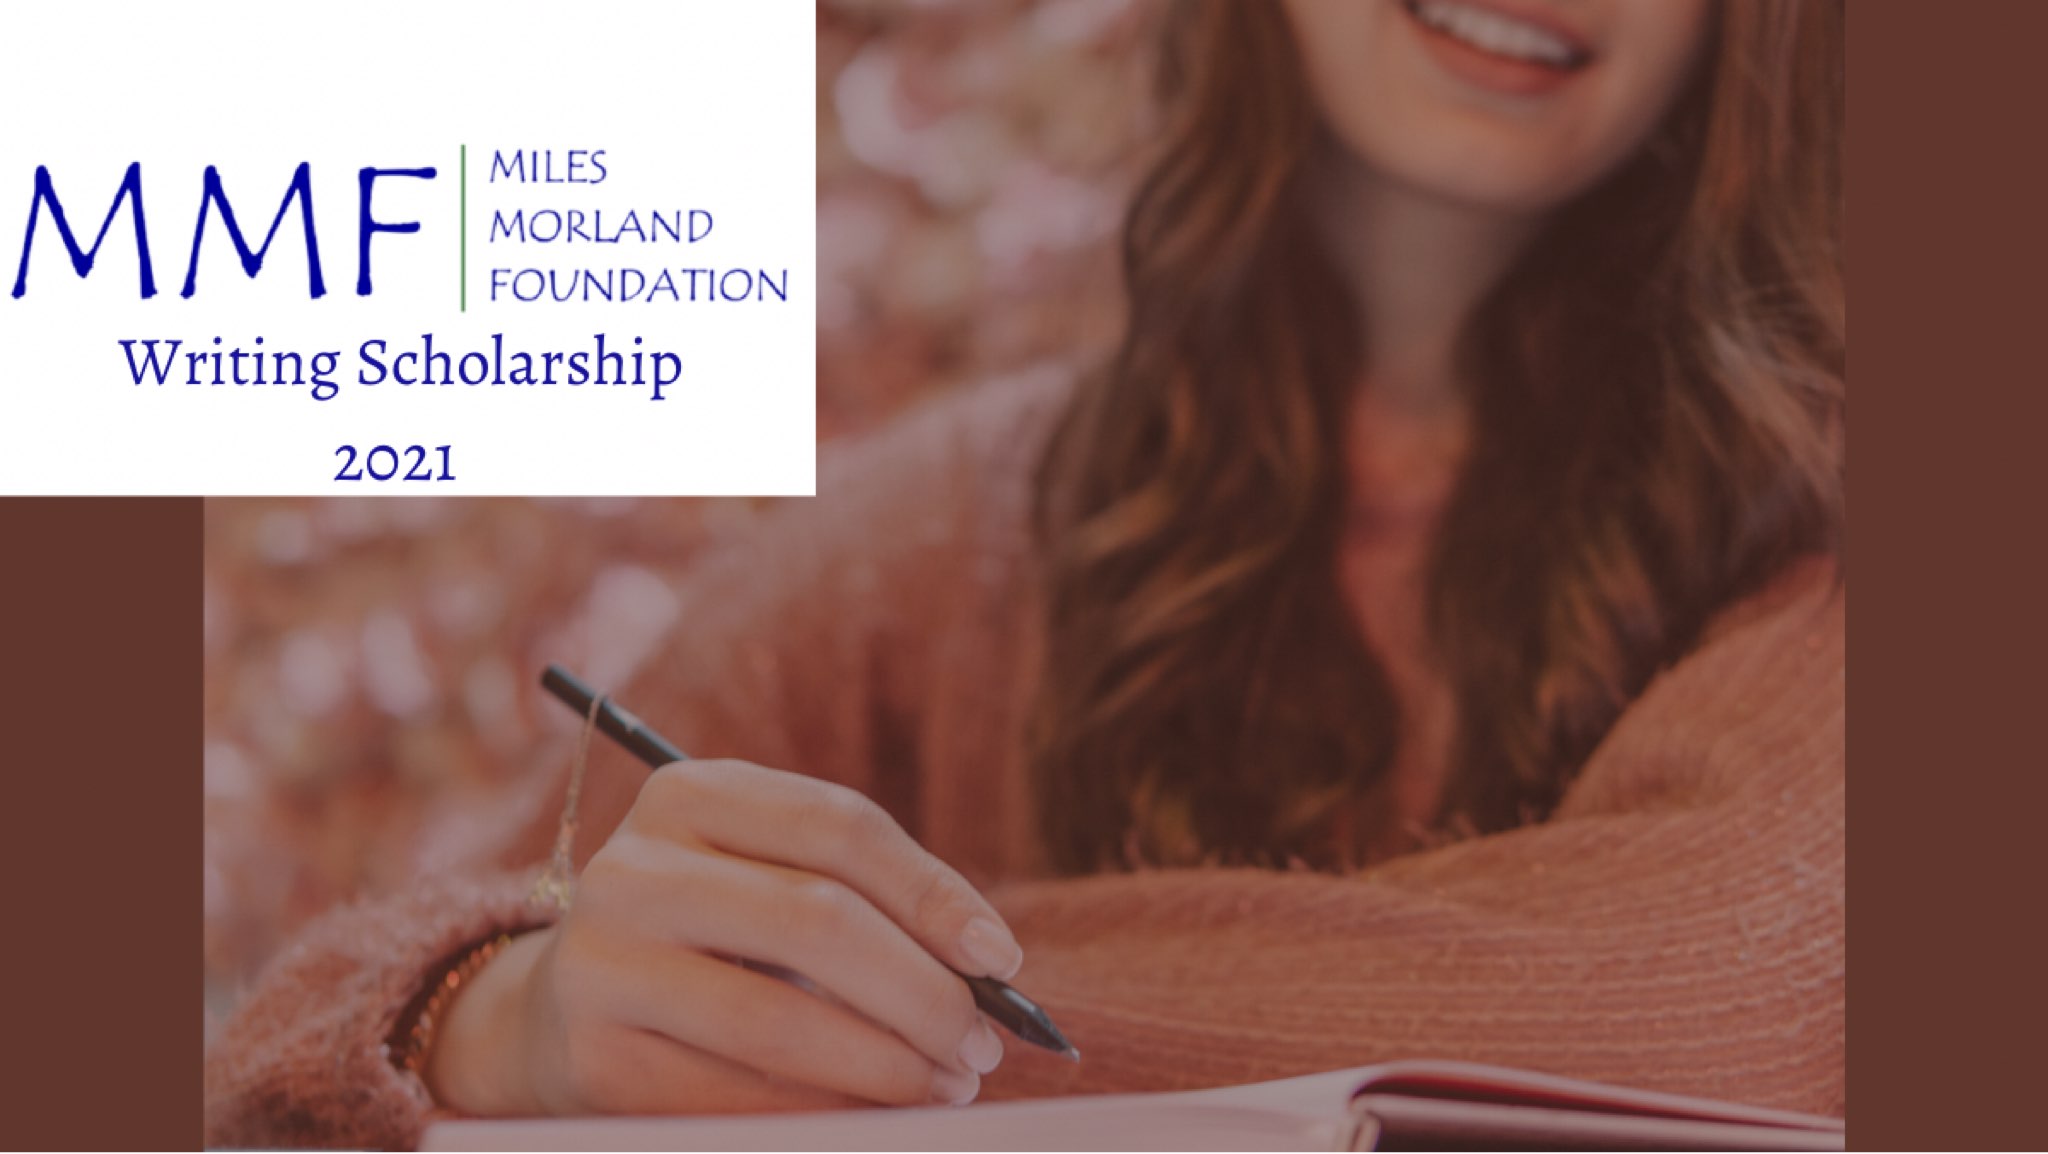 MMF Writing Scholarship for Africans 2021